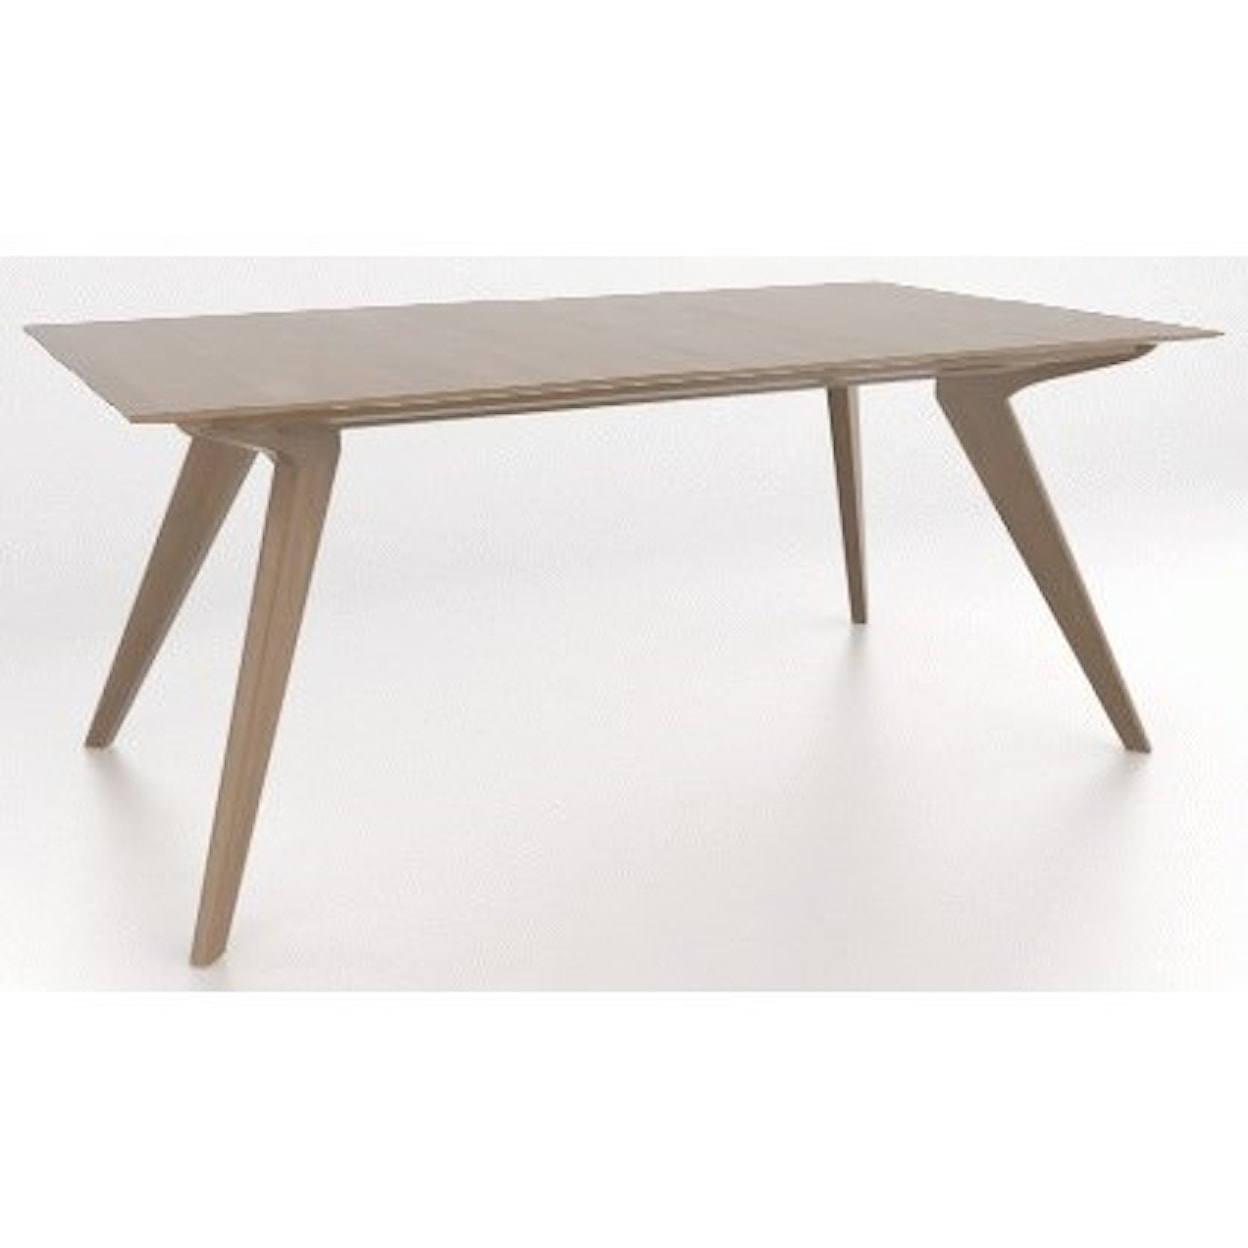 Canadel Downtown Customizable Wood Top Dining Table